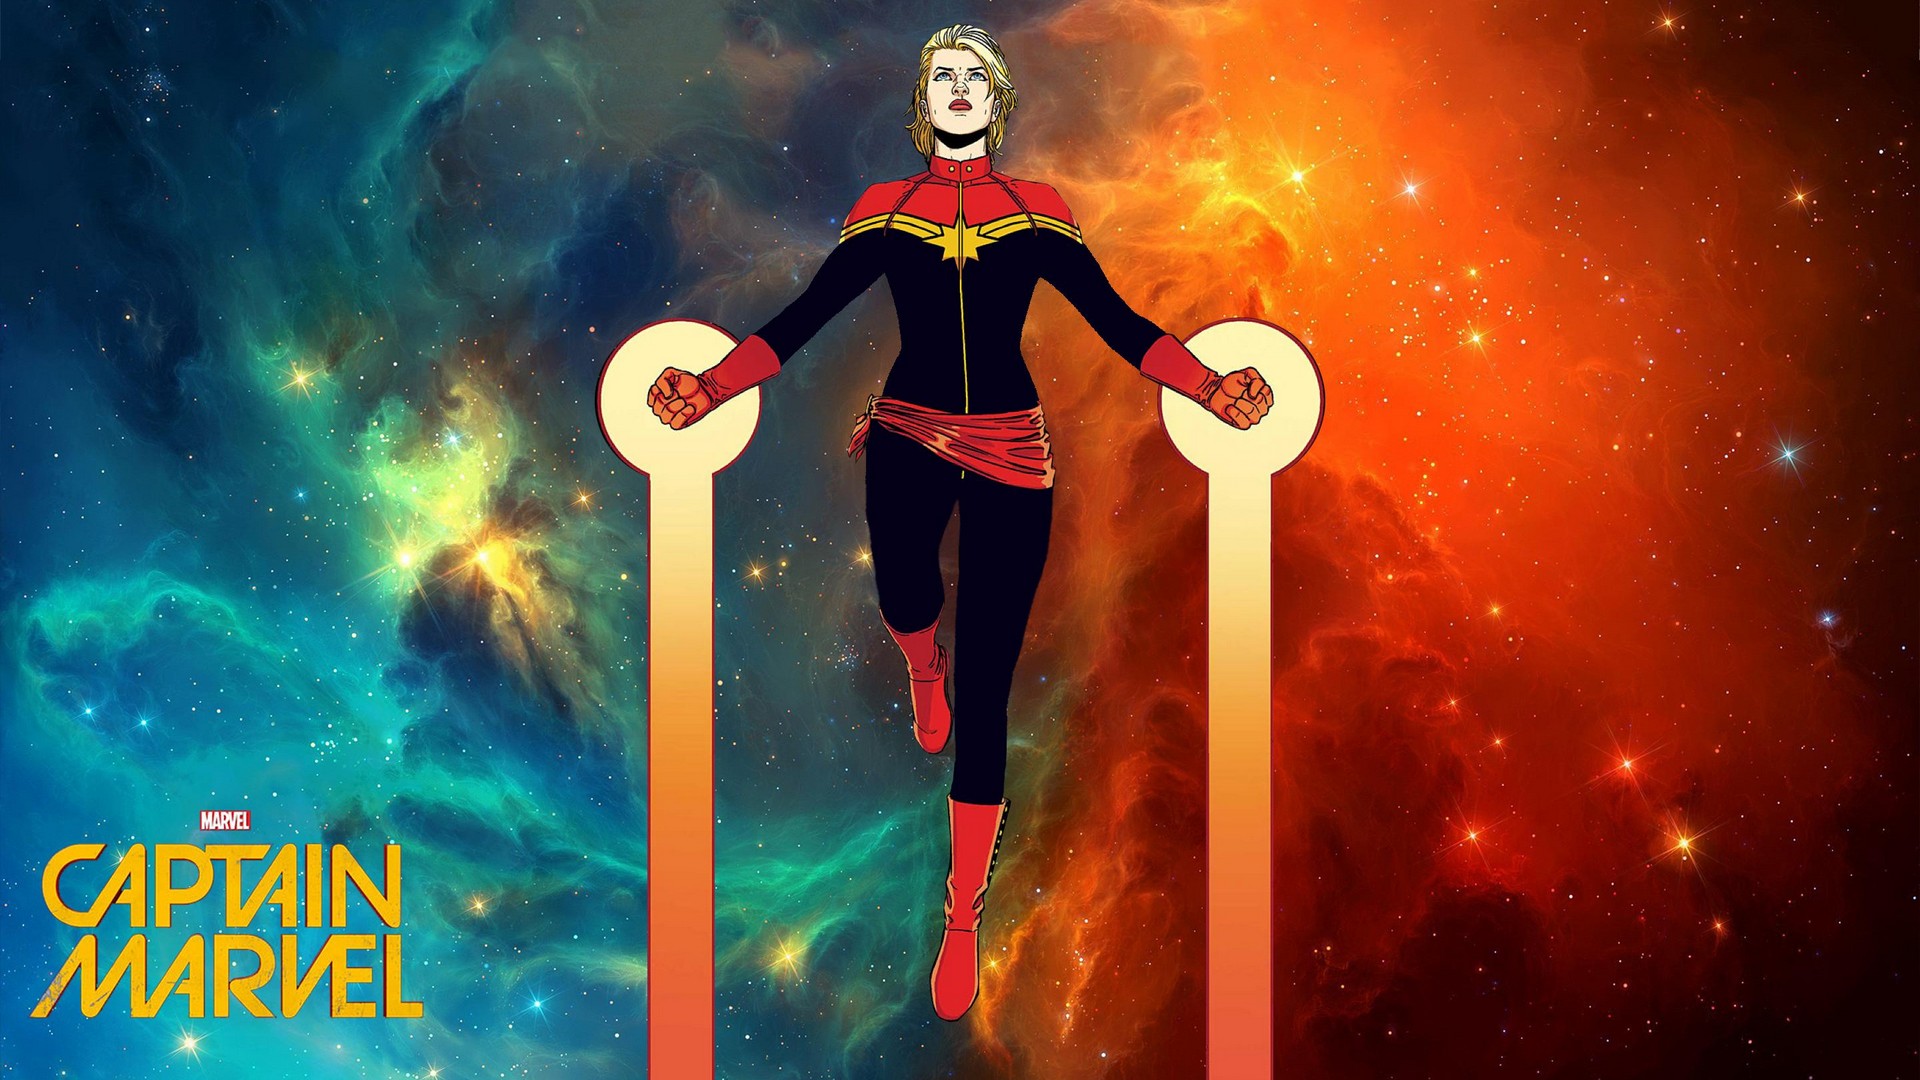 Wallpapers Captain Marvel Animated with high-resolution 1920x1080 pixel. You can use this poster wallpaper for your Desktop Computers, Mac Screensavers, Windows Backgrounds, iPhone Wallpapers, Tablet or Android Lock screen and another Mobile device